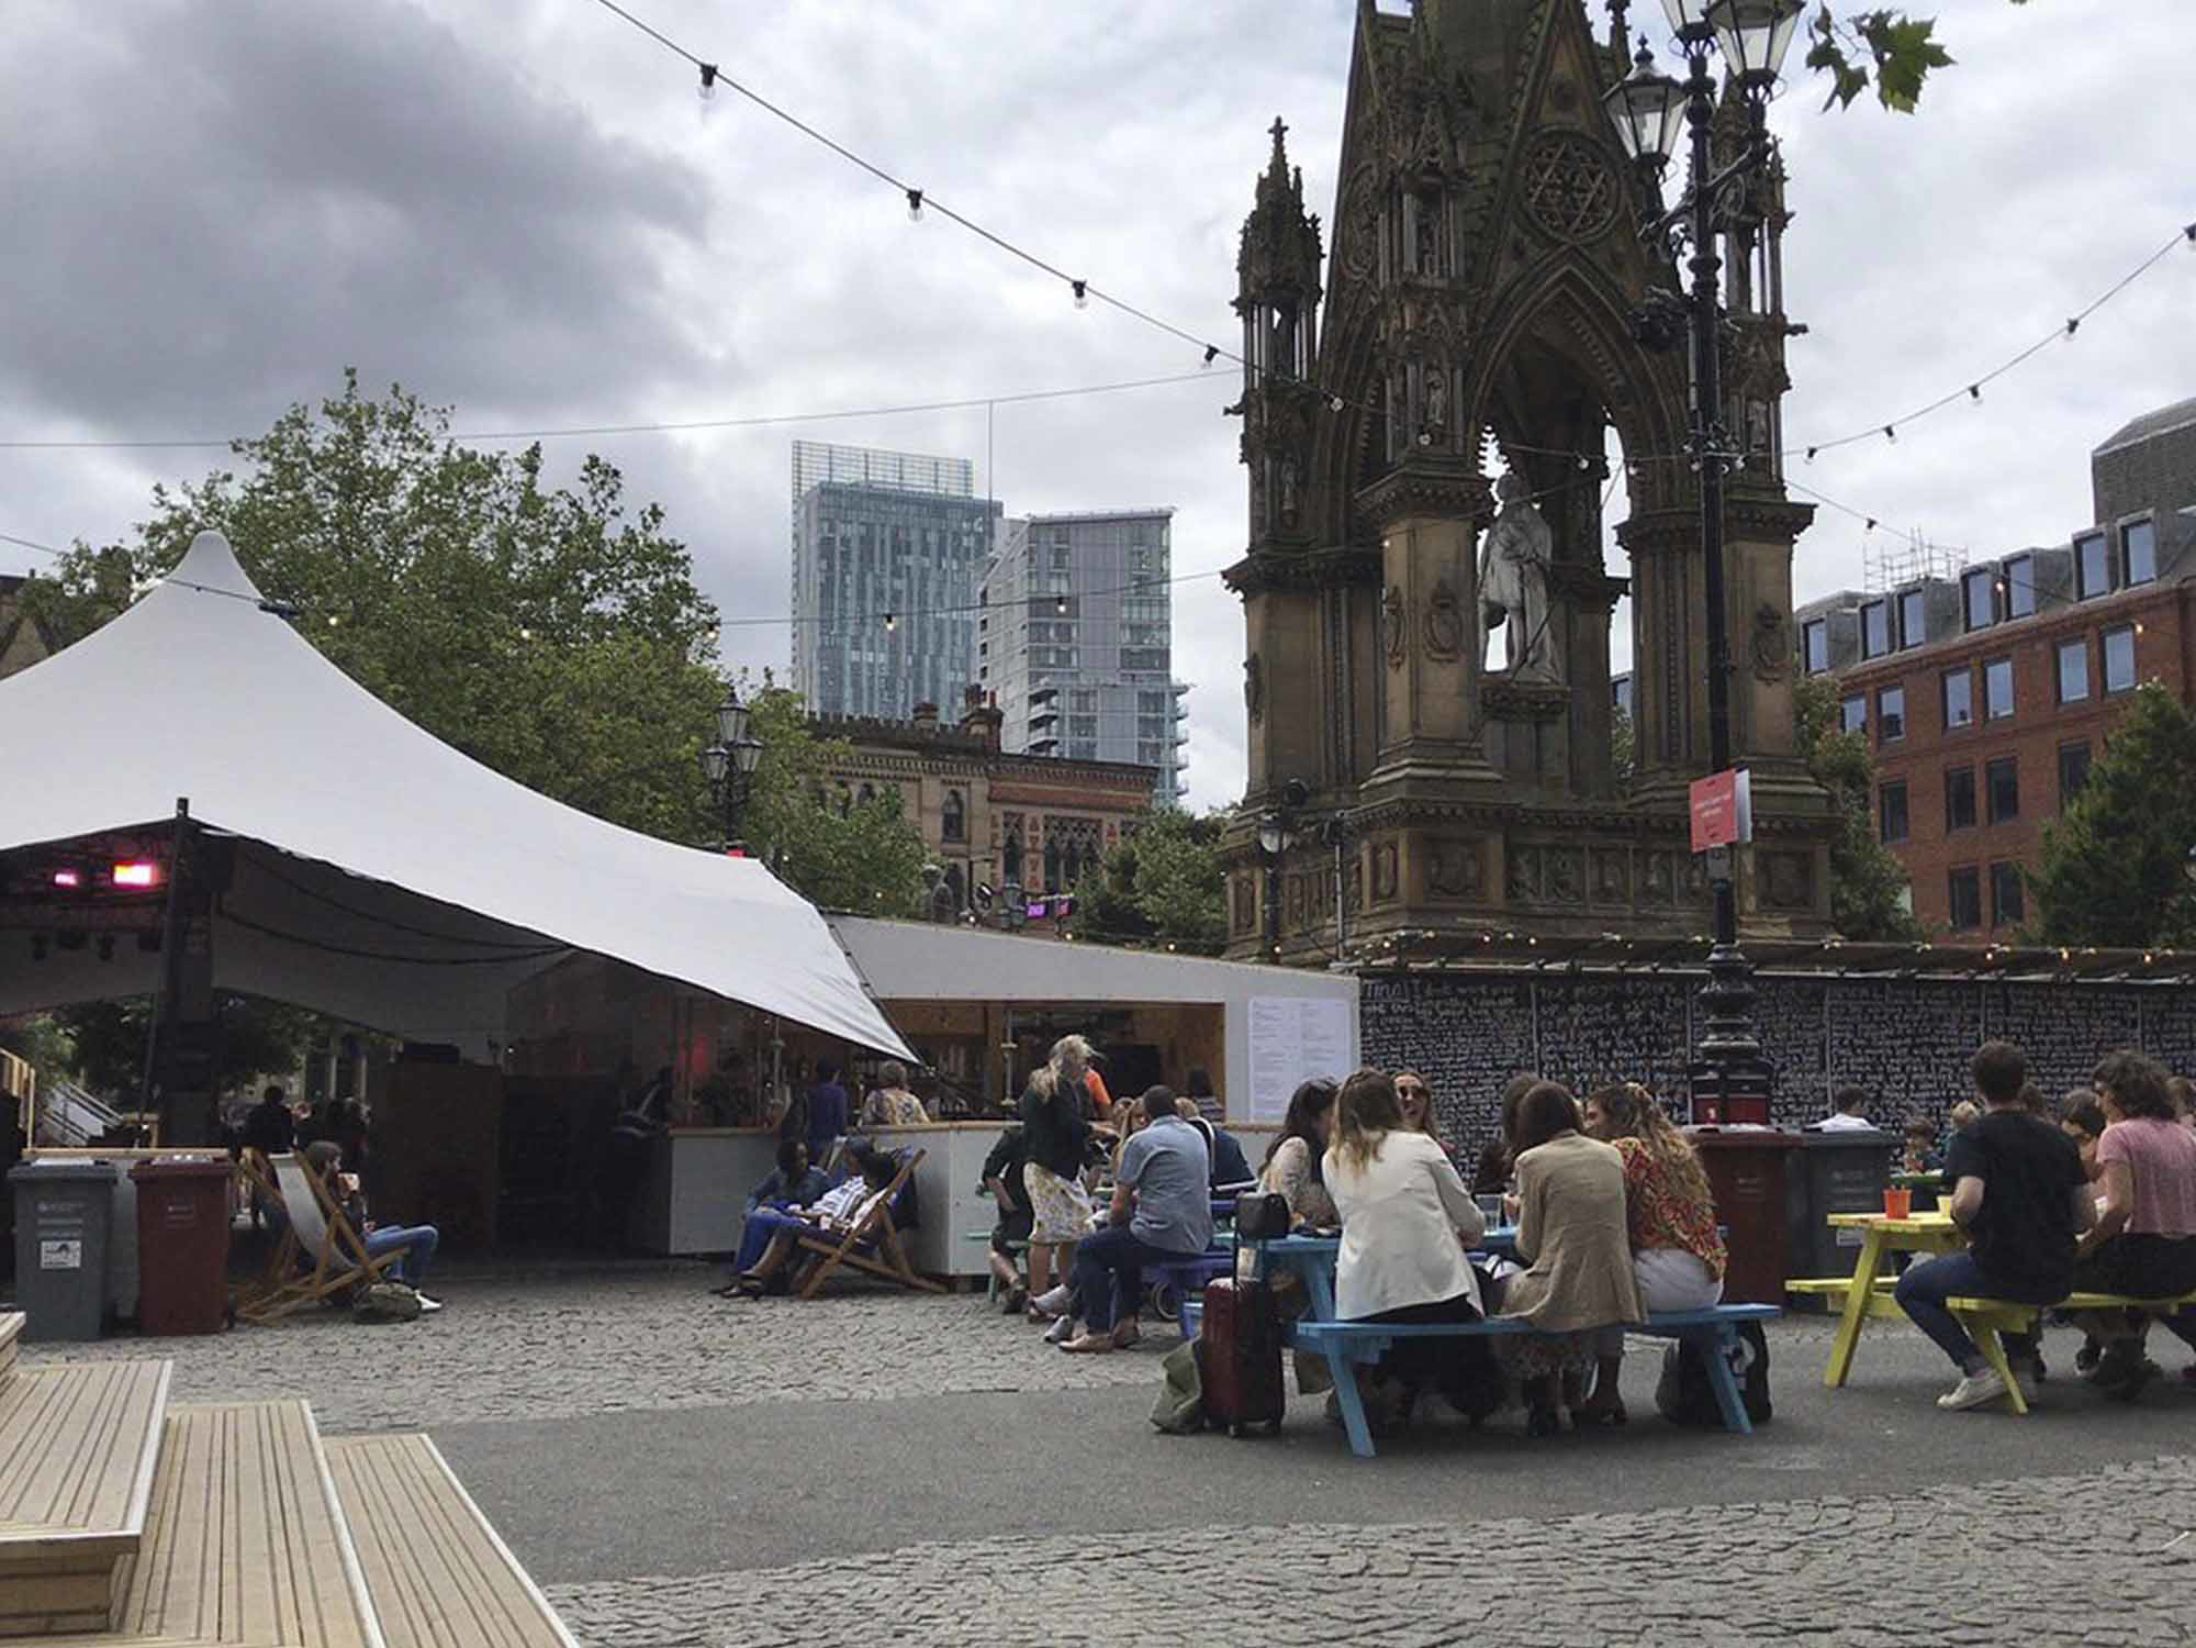 Manchester Events to Know About - Manchester International Festival